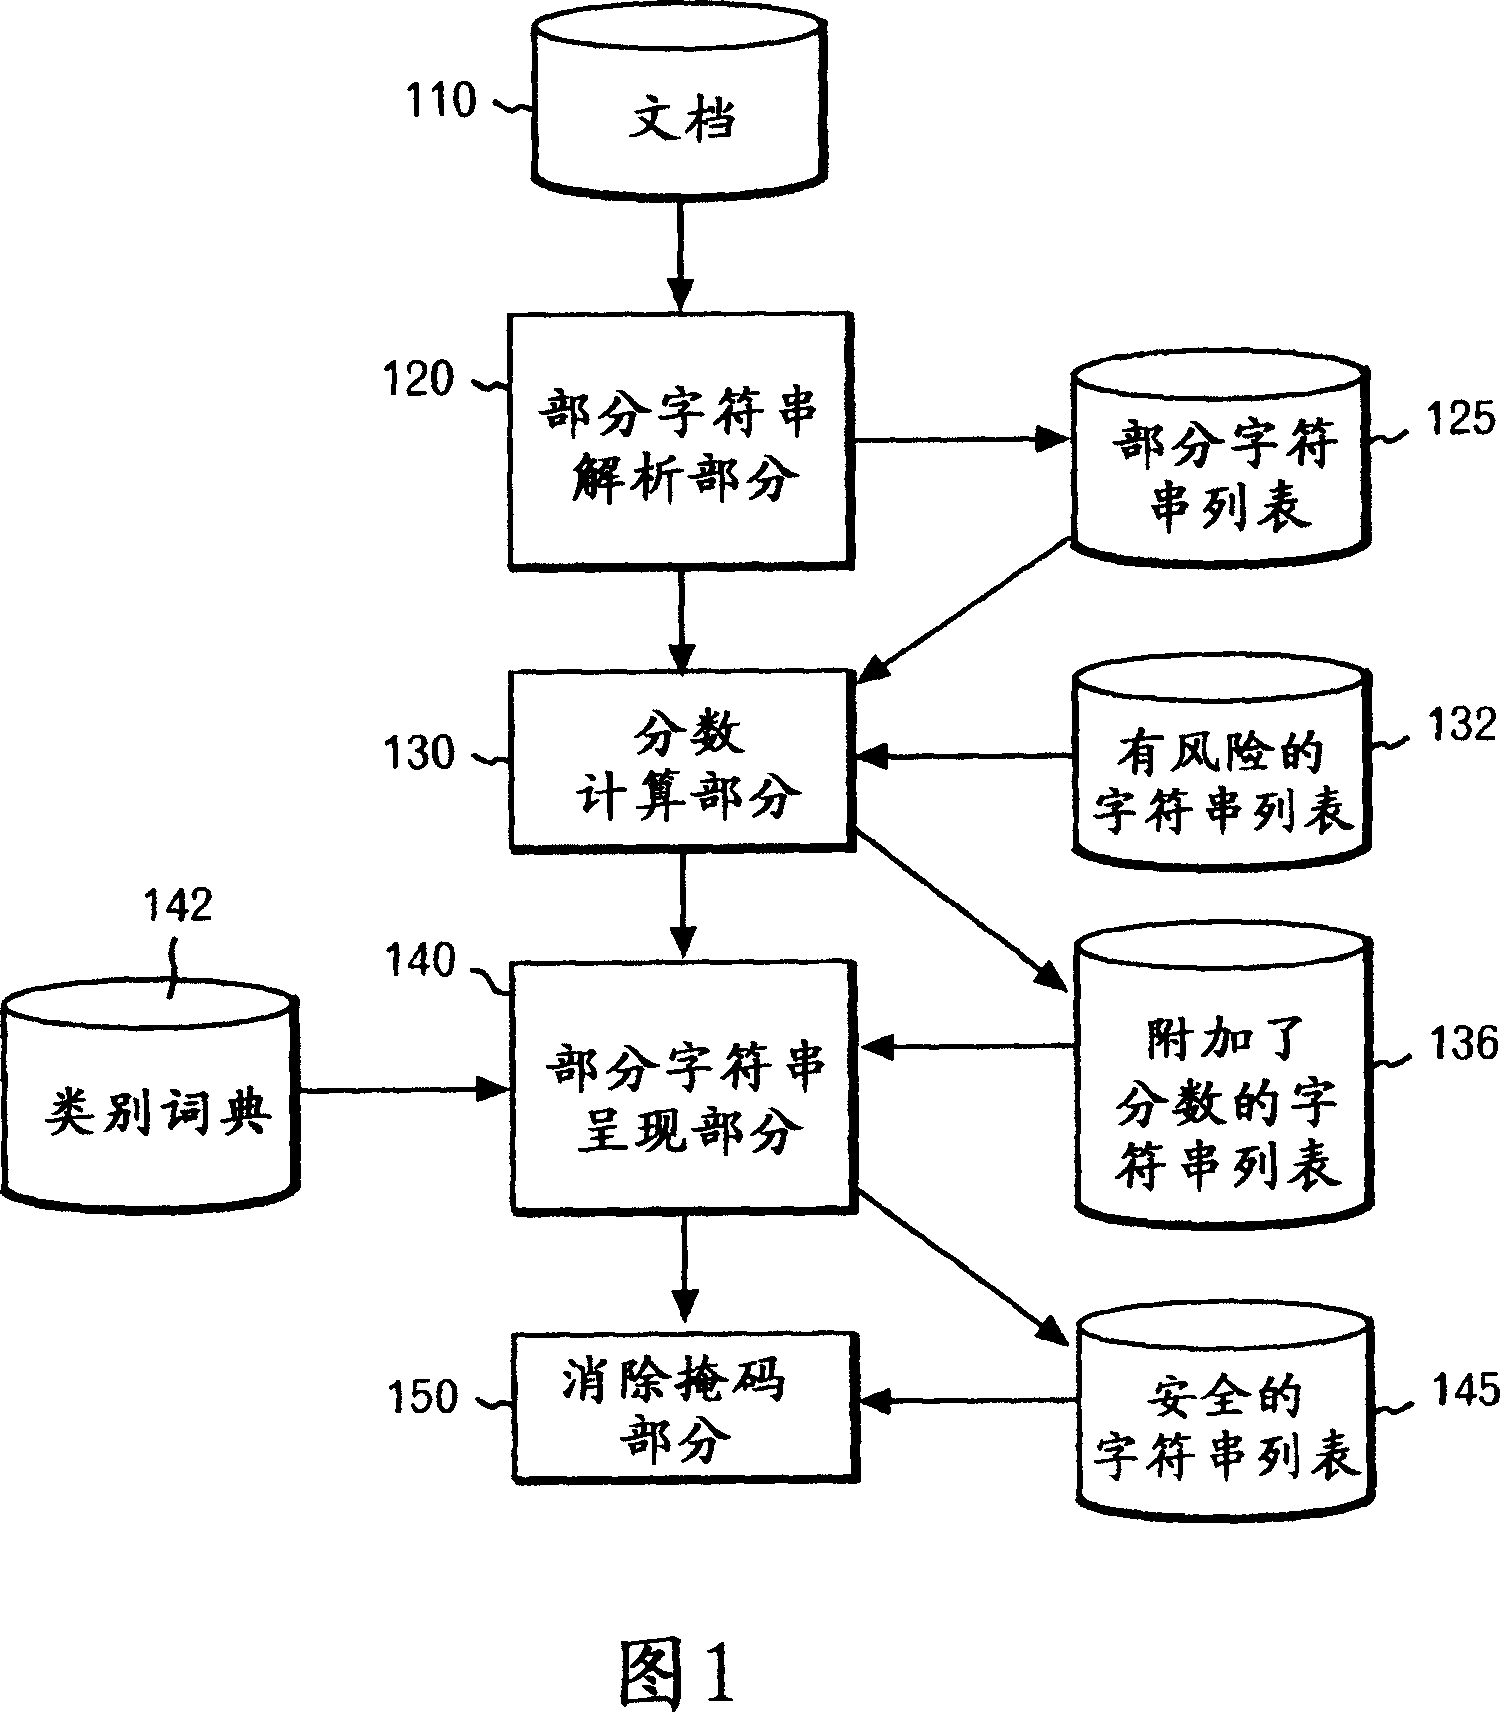 Character string processing method and apparatus